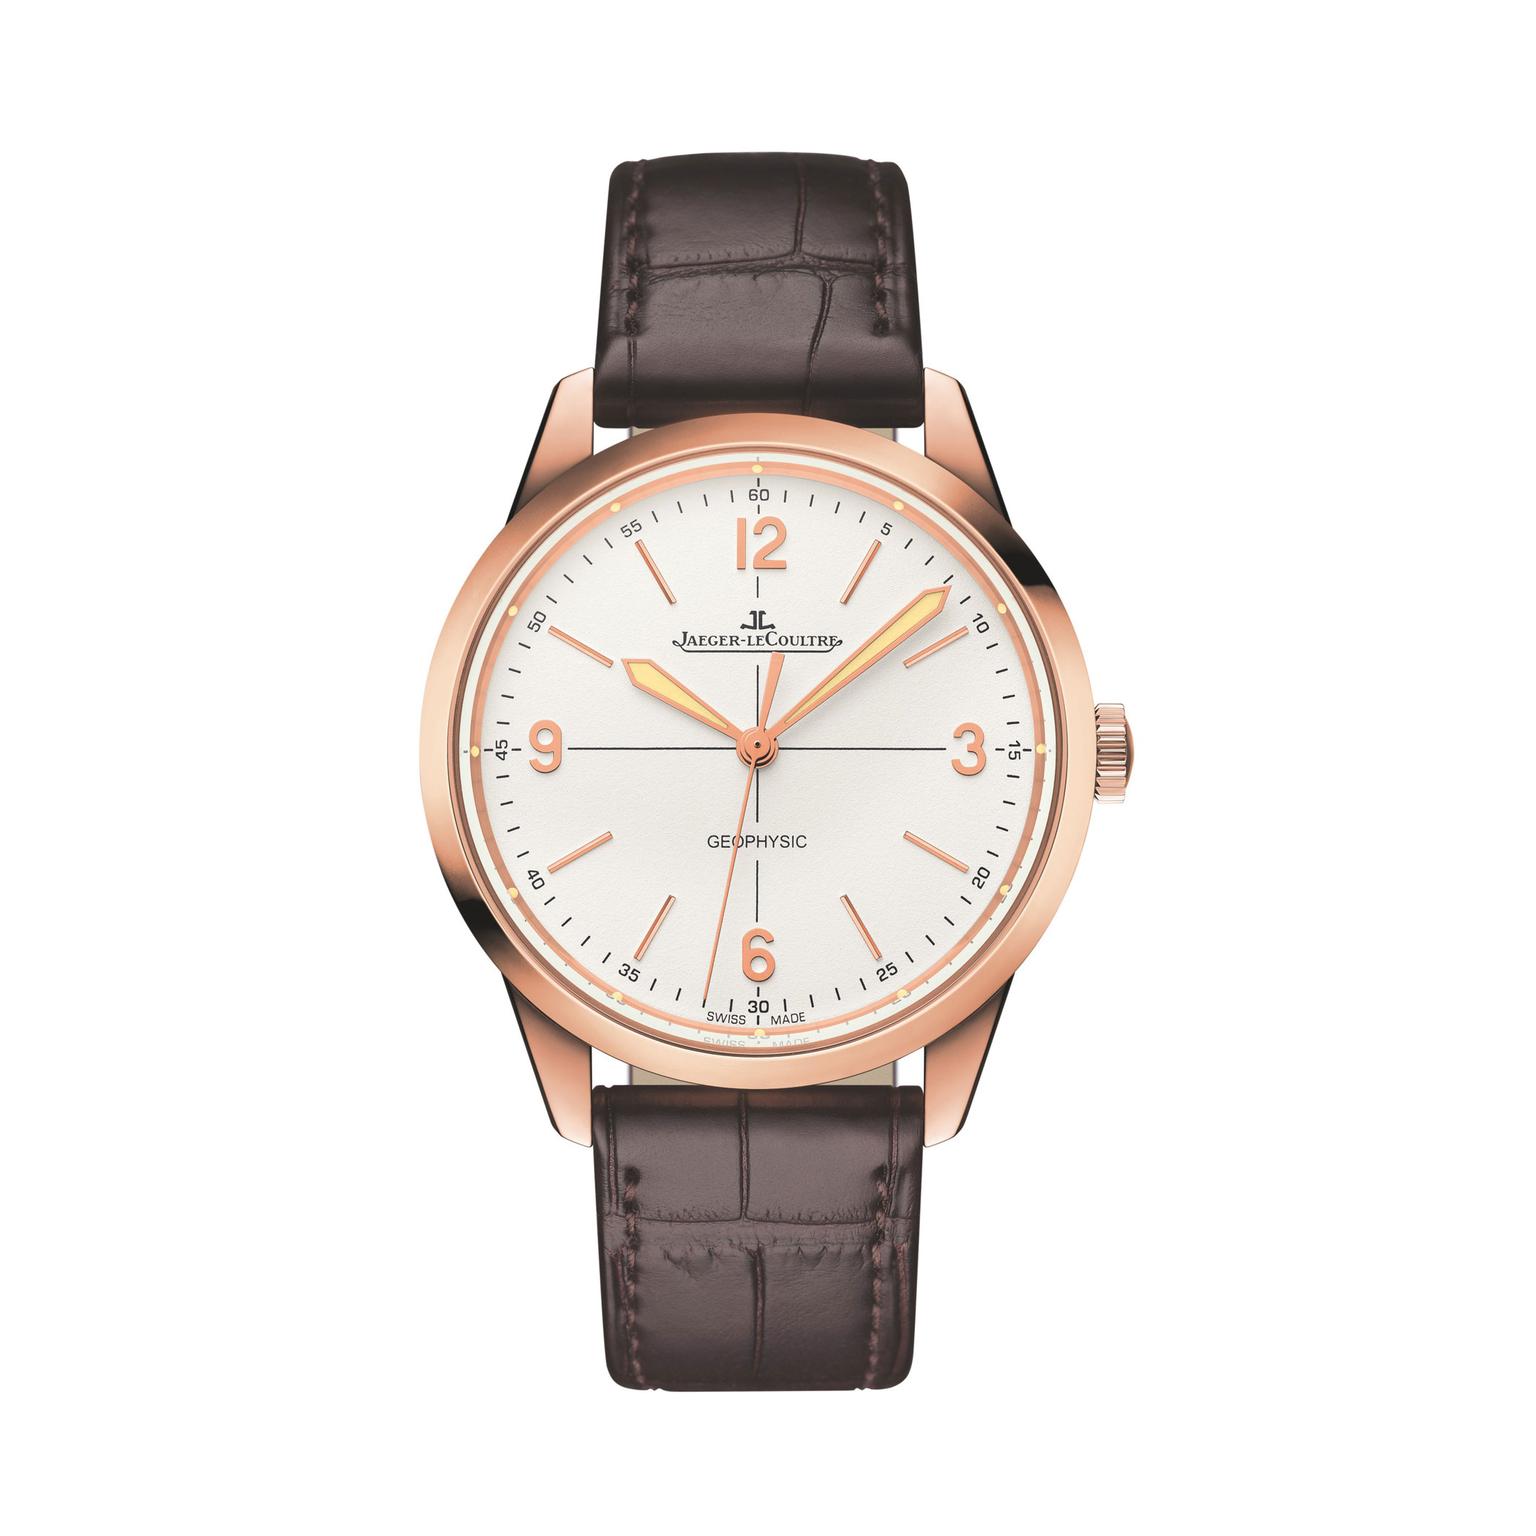 Jaeger LeCoultre Geophysic rose gold watch_zoom.jpg